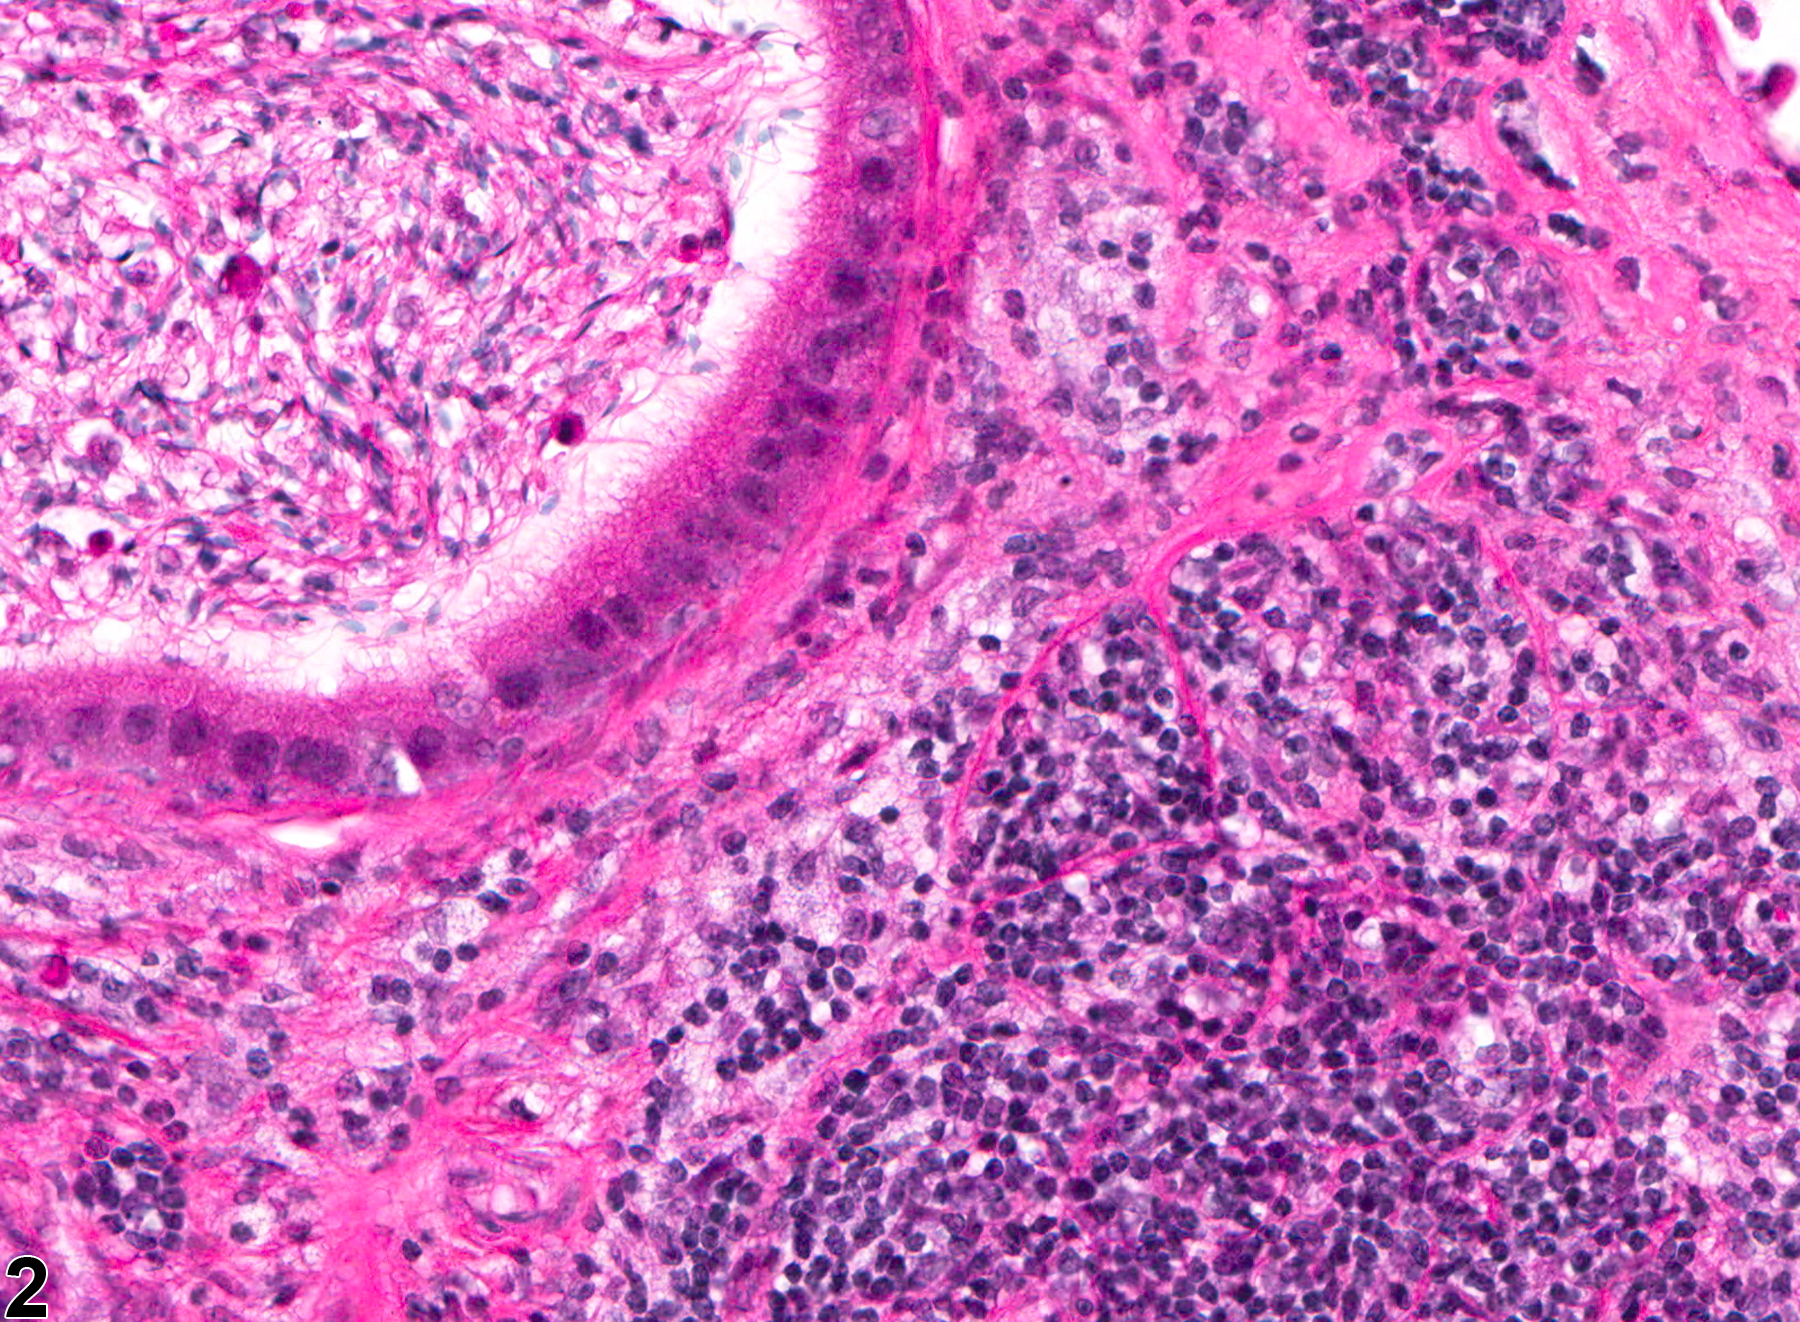 Image of inflammation in the epididymis from a male B6C3F1 mouse in a chronic study